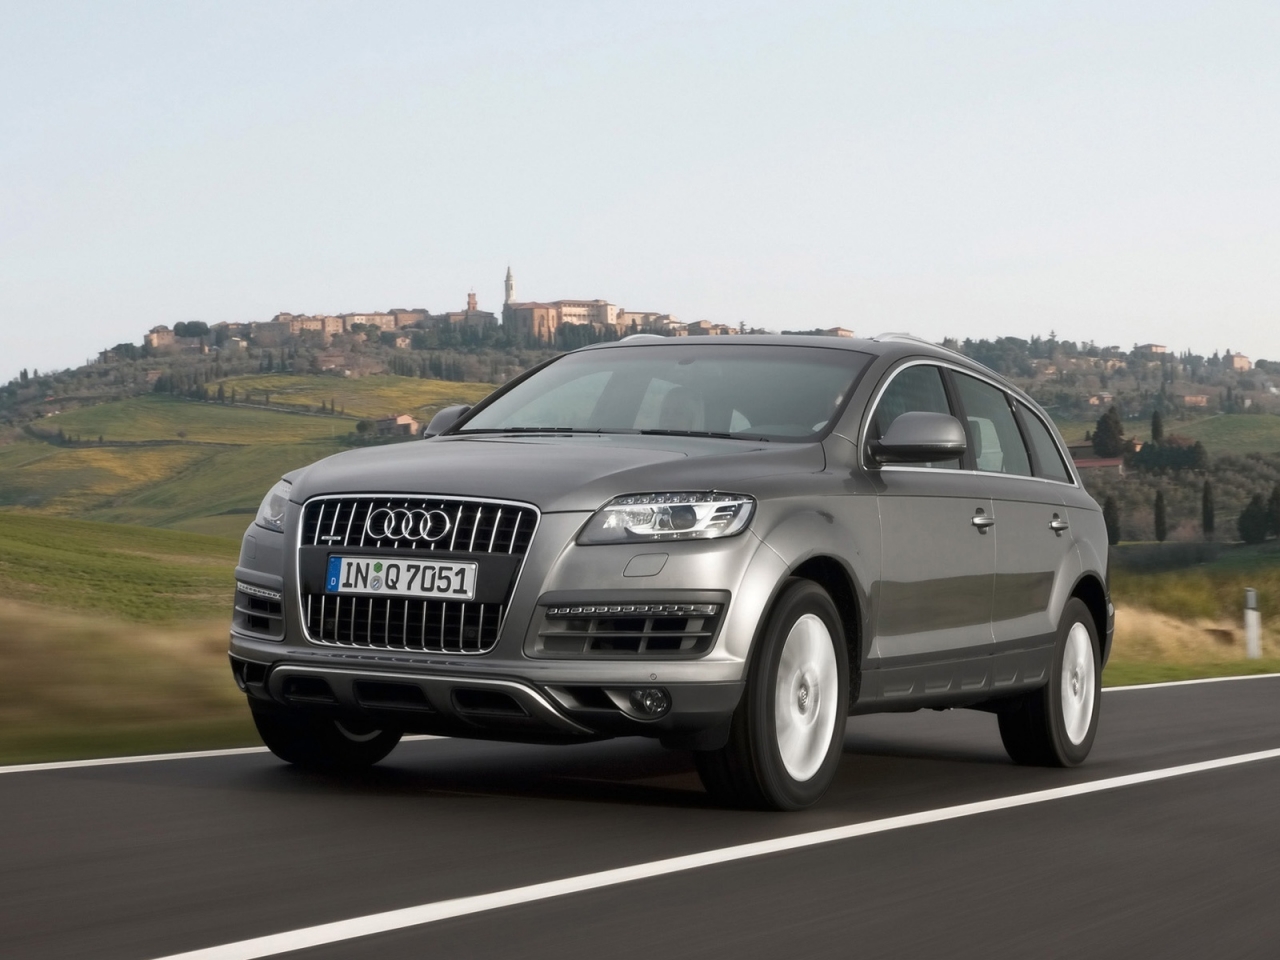 2009 Audi Q7 - Grey Front Angle Speed 1 for 1280 x 960 resolution